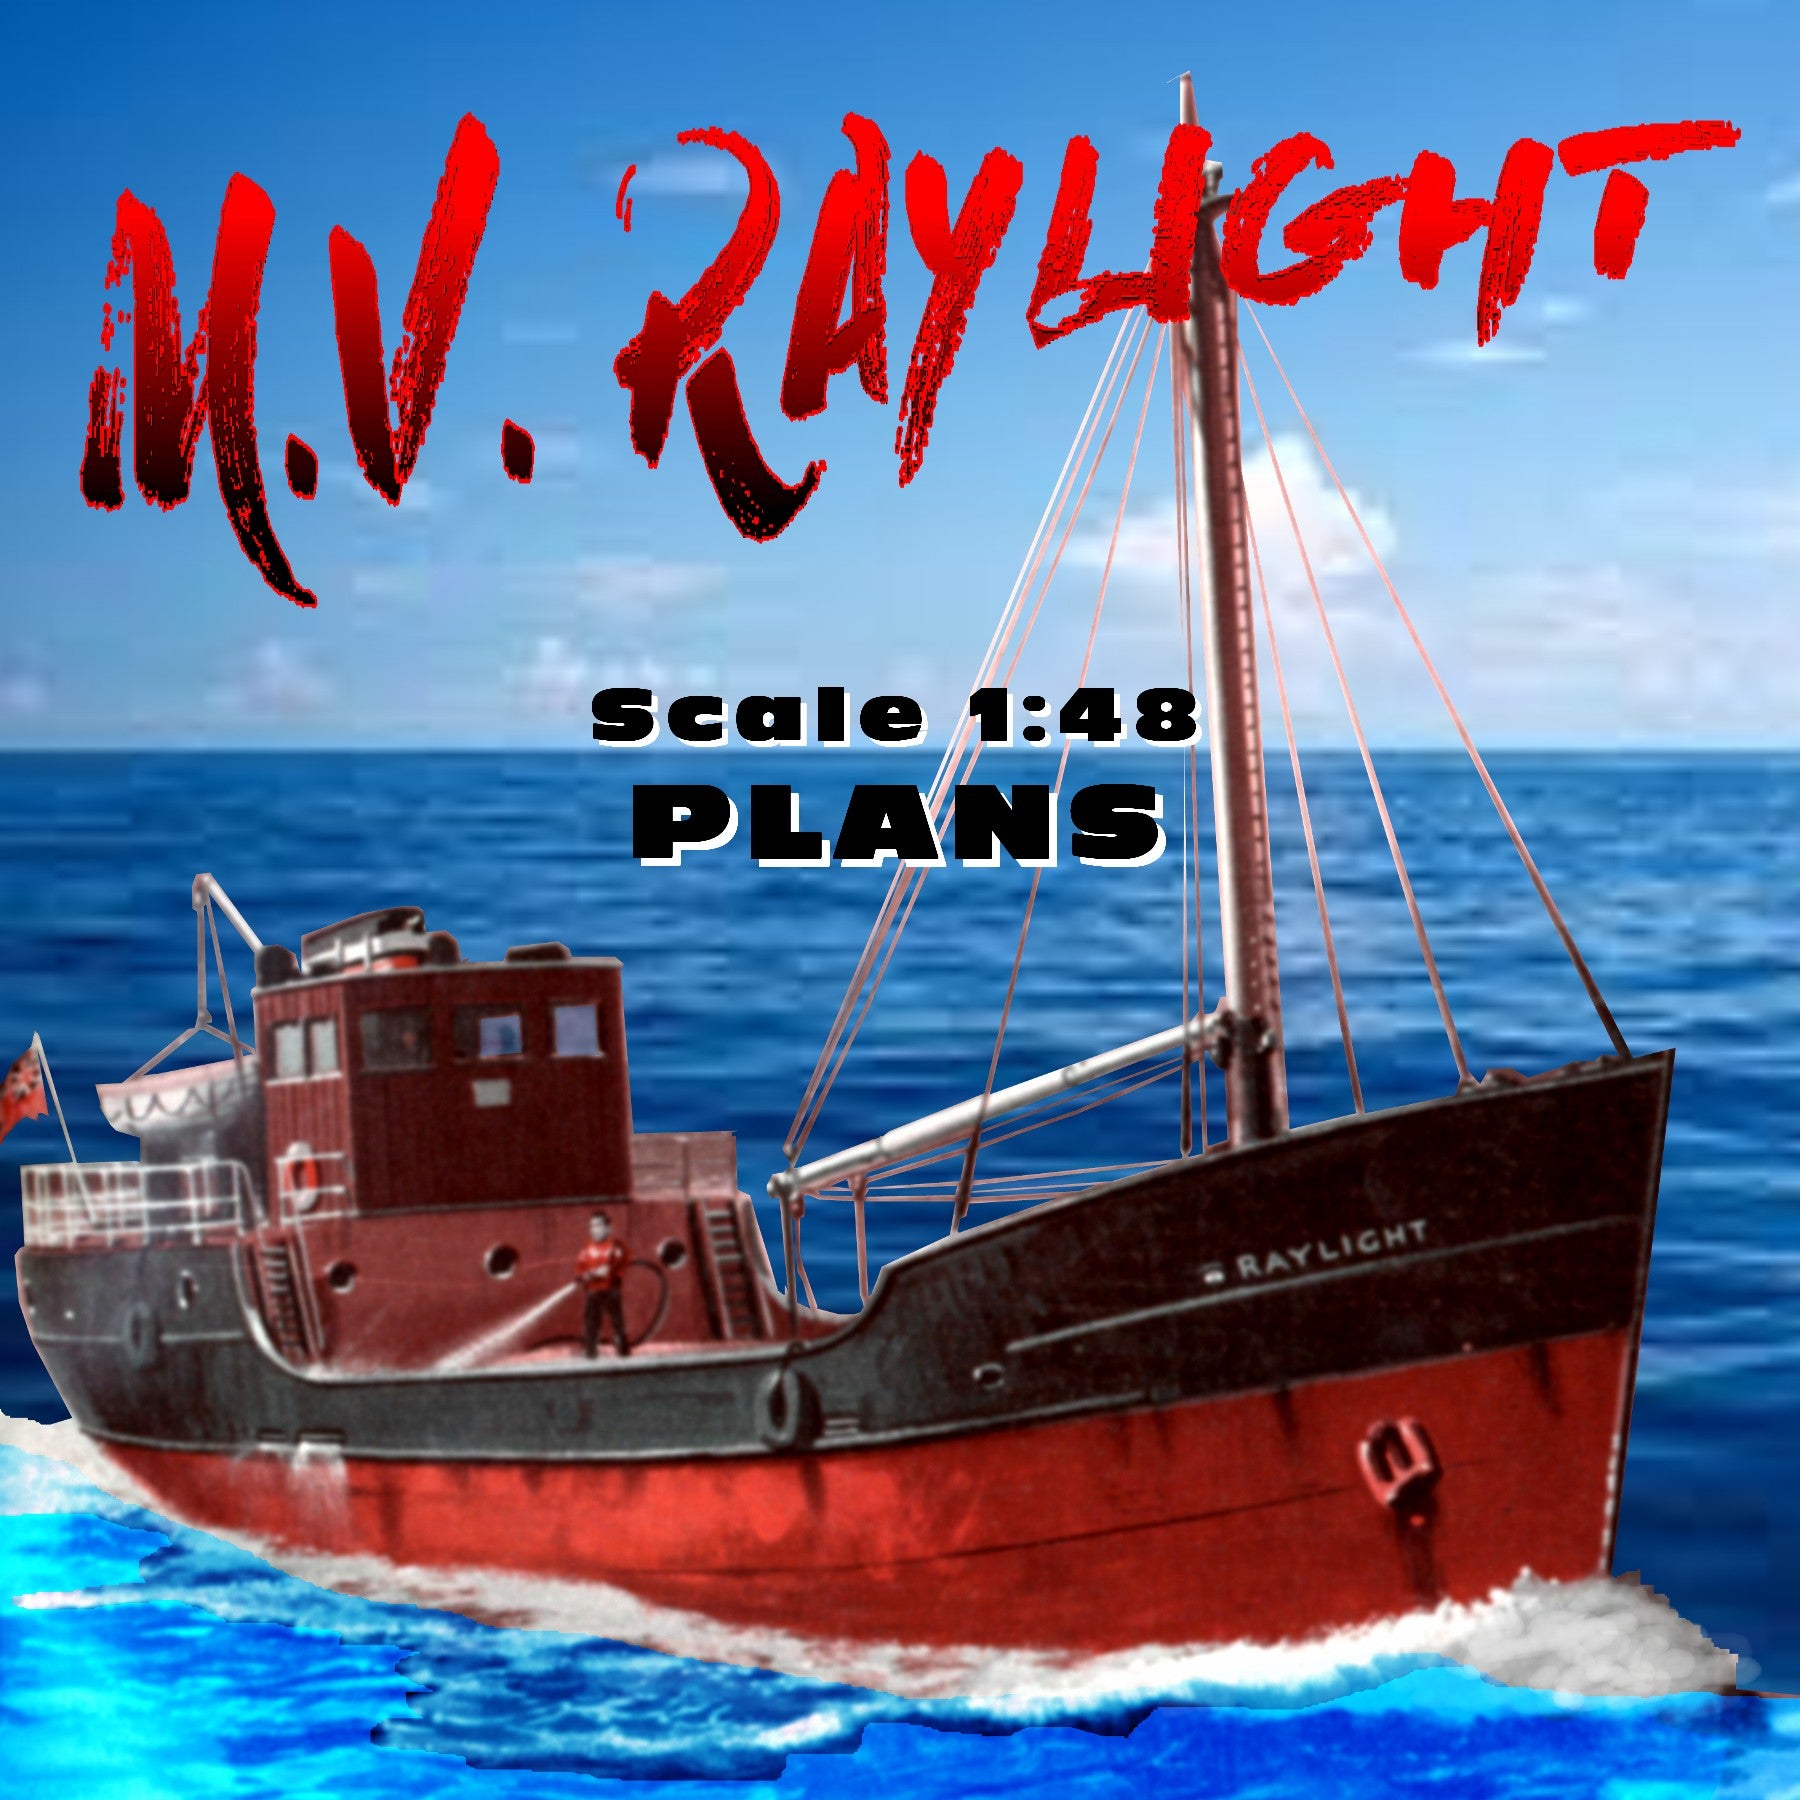 full size printed plans  a modern clyde "puffer" m.v. raylight scale 1:48 suitable for radio control